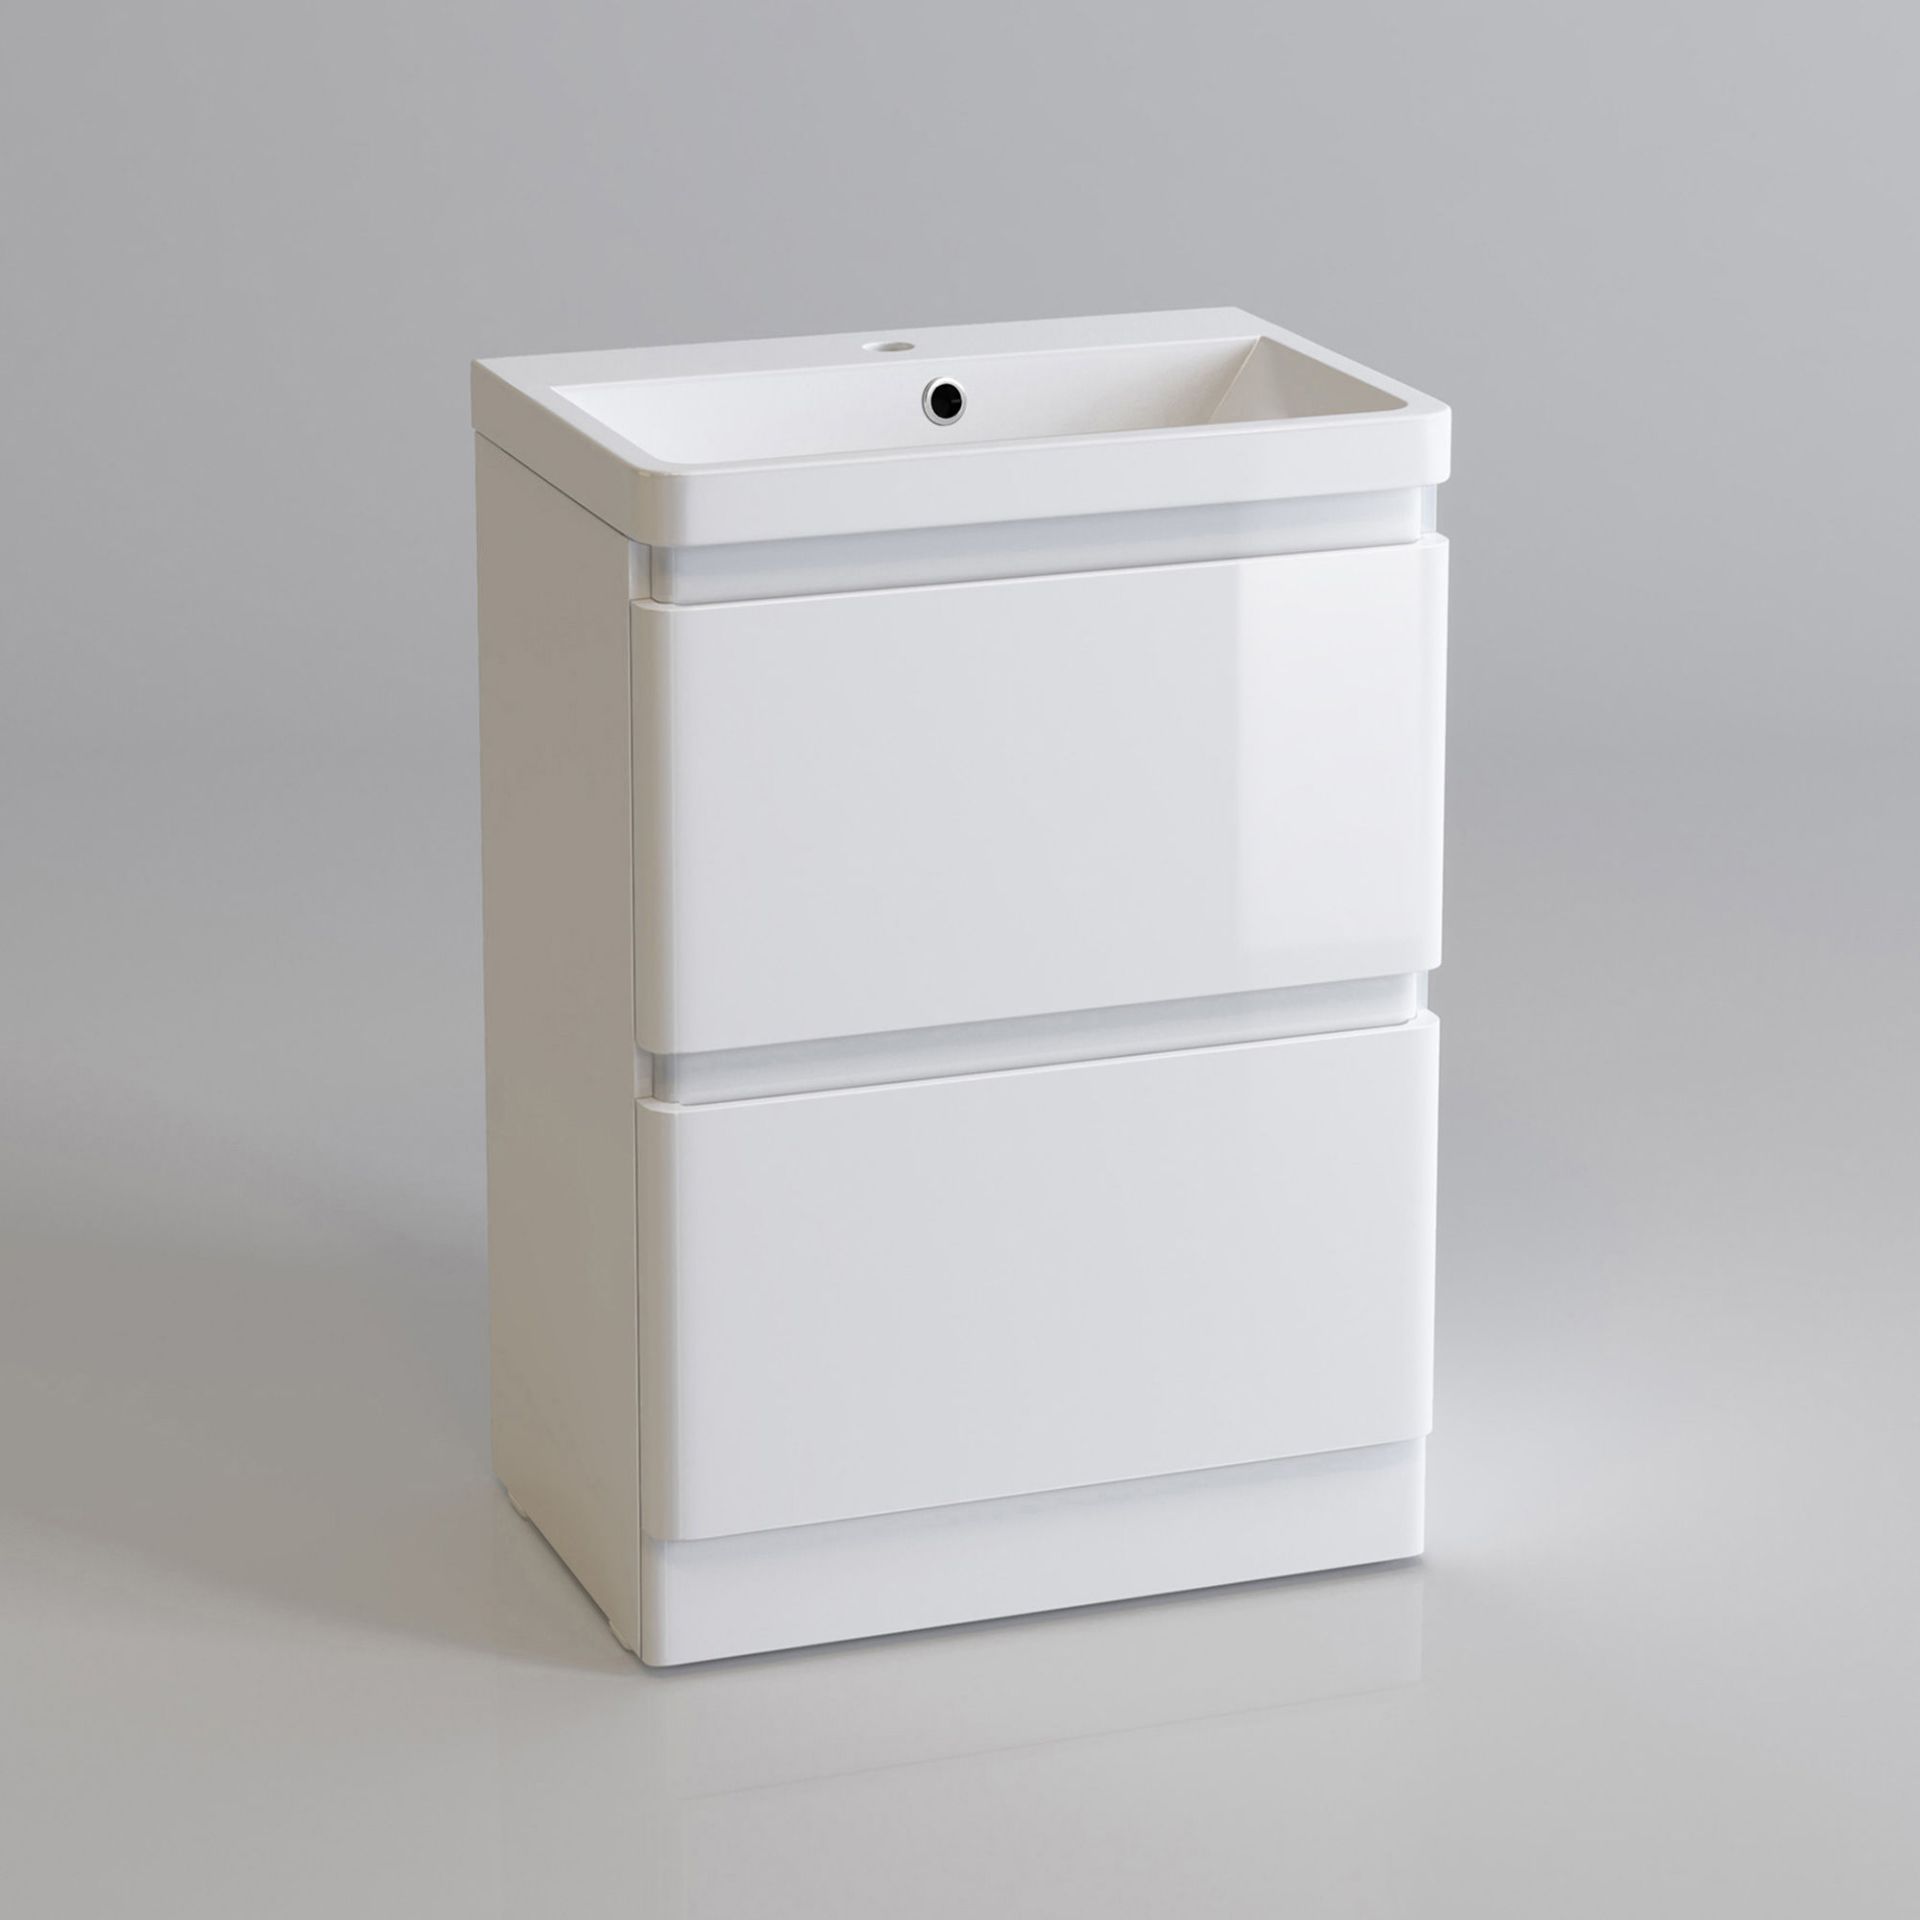 (KL300) 600mm Denver Gloss White Drawer Unit - Floor Standing. . Does NOT include basin. If you - Image 3 of 4